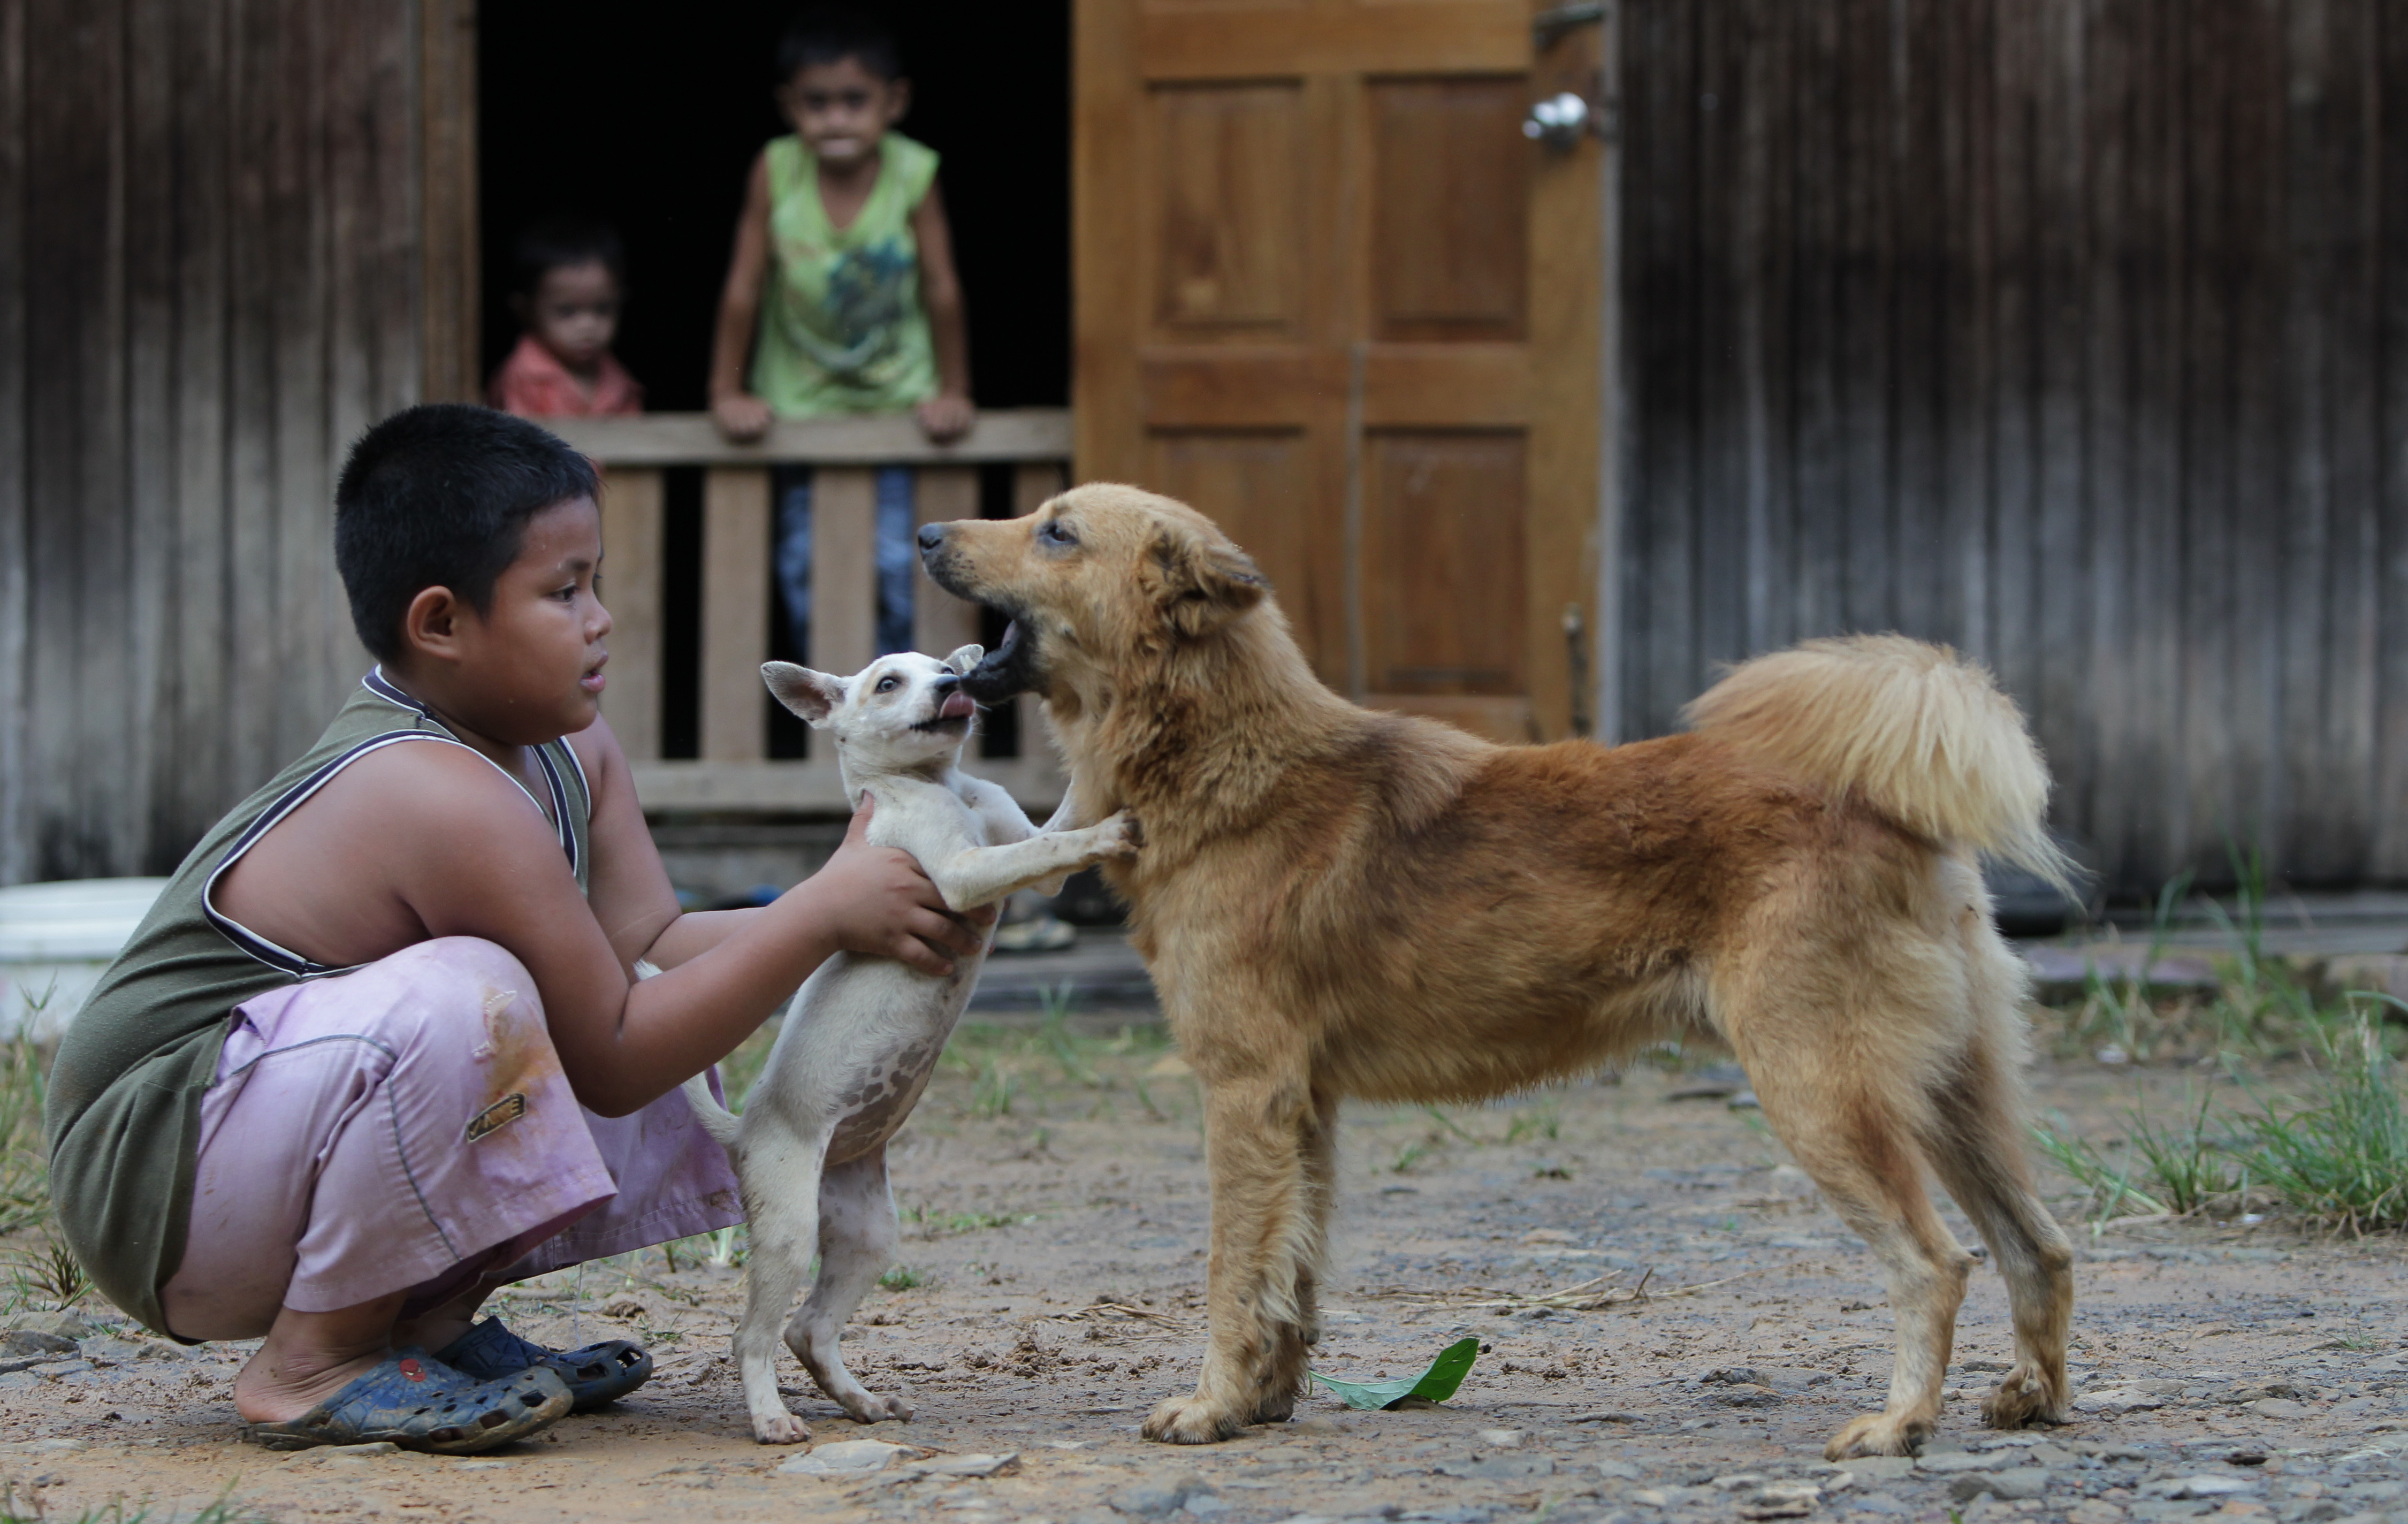 A boy plays with dogs outside his long house in Nahajale, Malaysia's Sarawak region, on Sept. 25, 2011 (Mohd Rasfan—AFP/Getty Images)